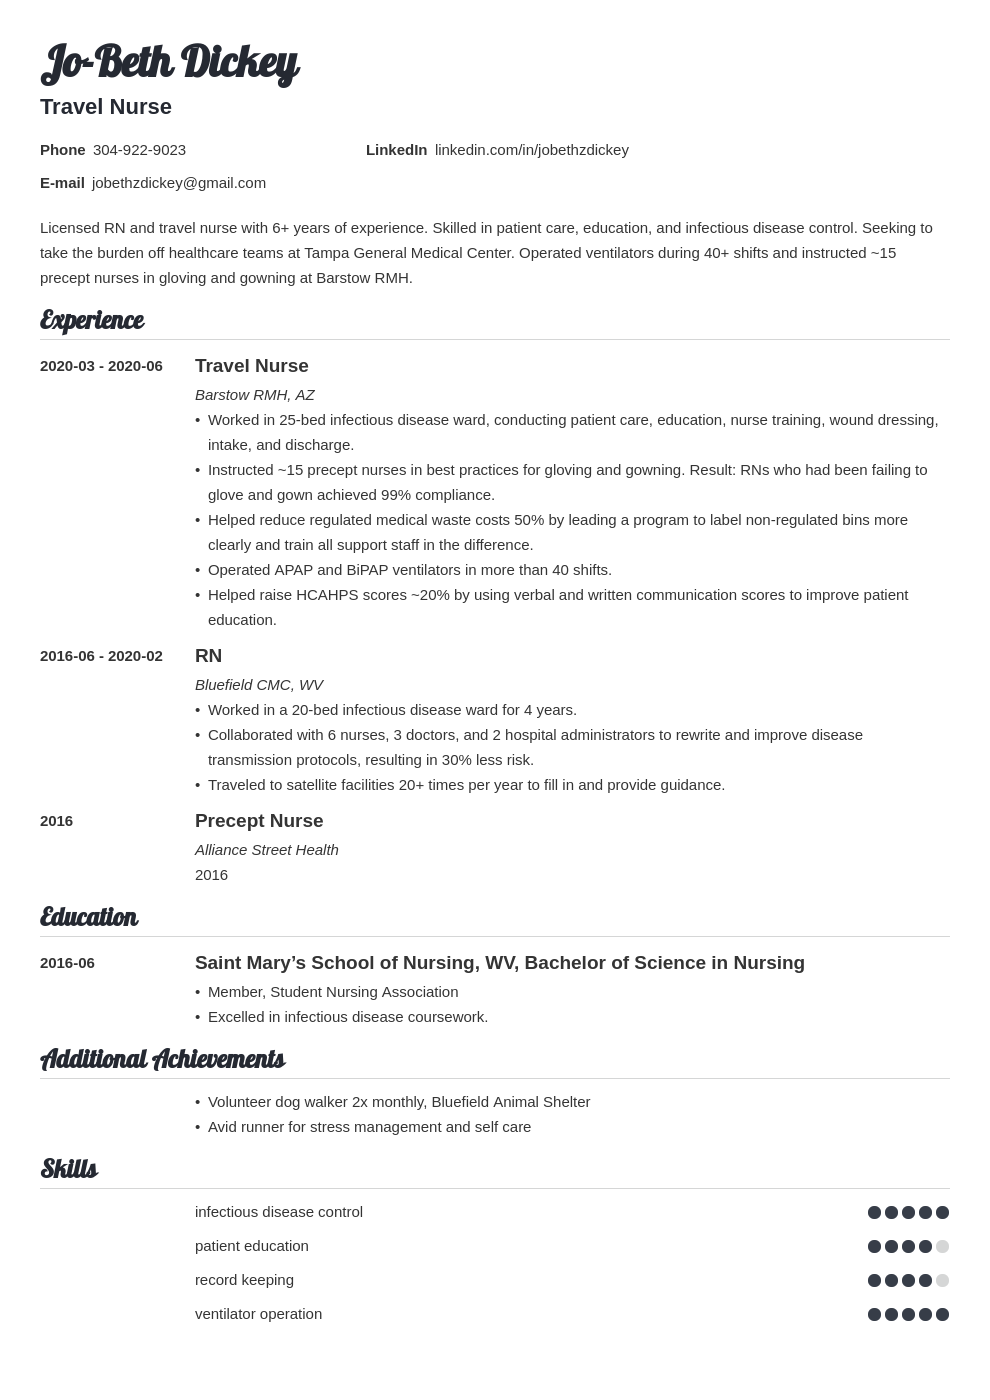 Travel Nurse Resume: Examples and Guide 10  Tips